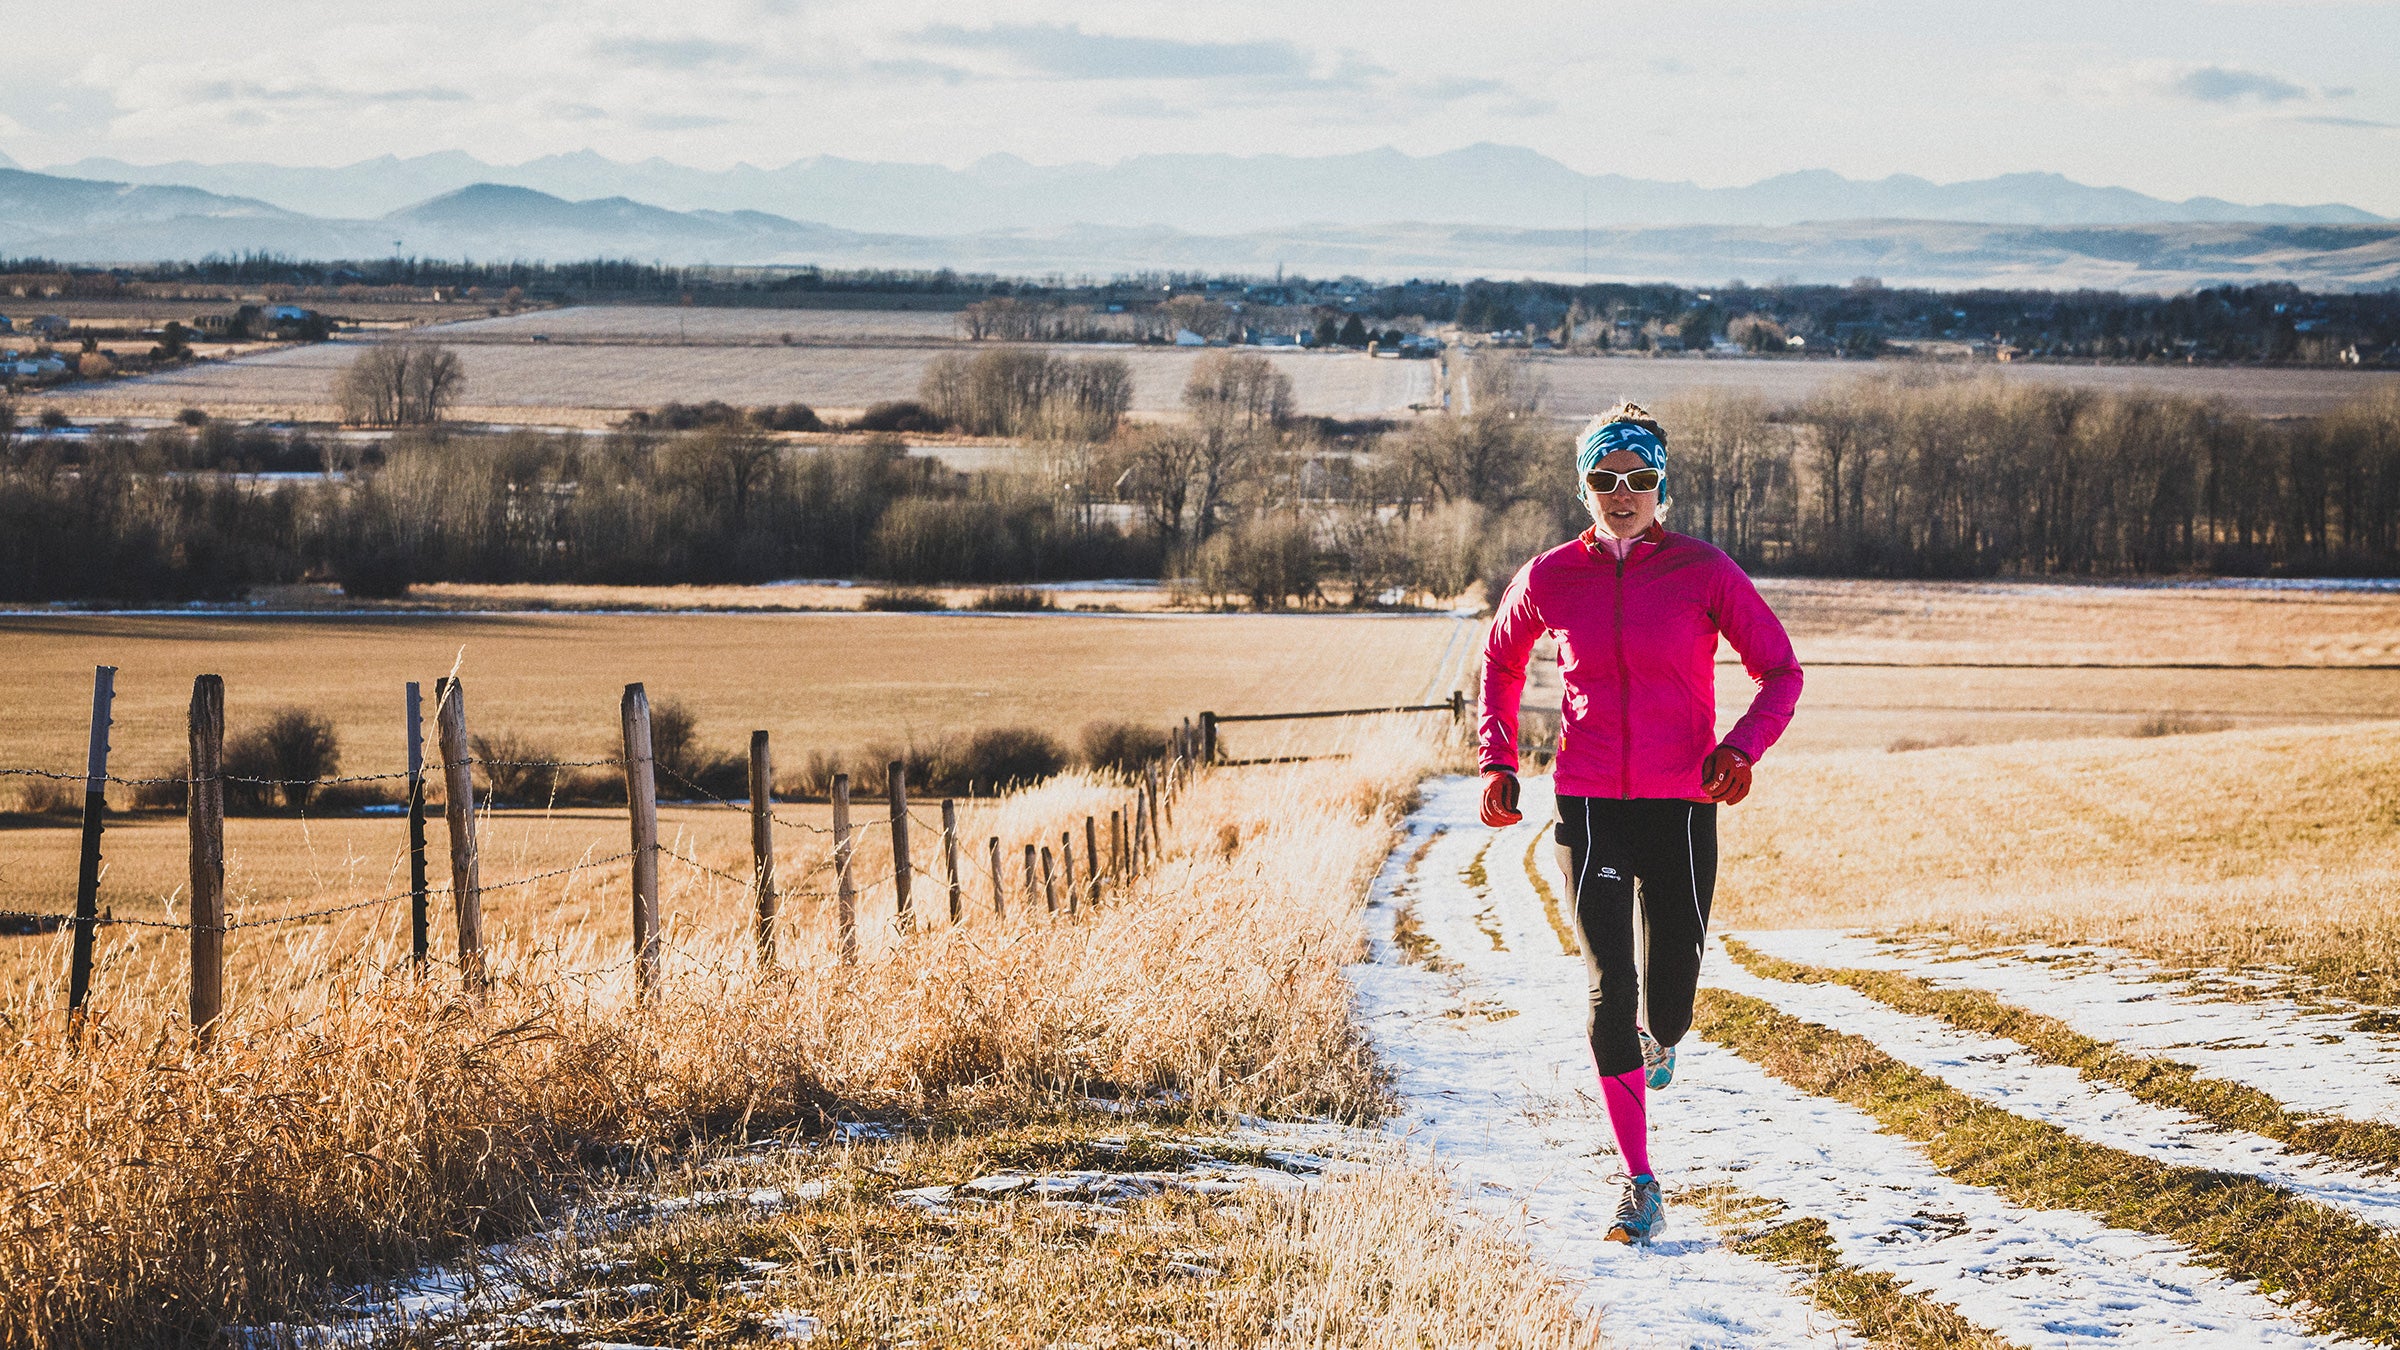 Winter Running Pants And Tights For Road And Trail